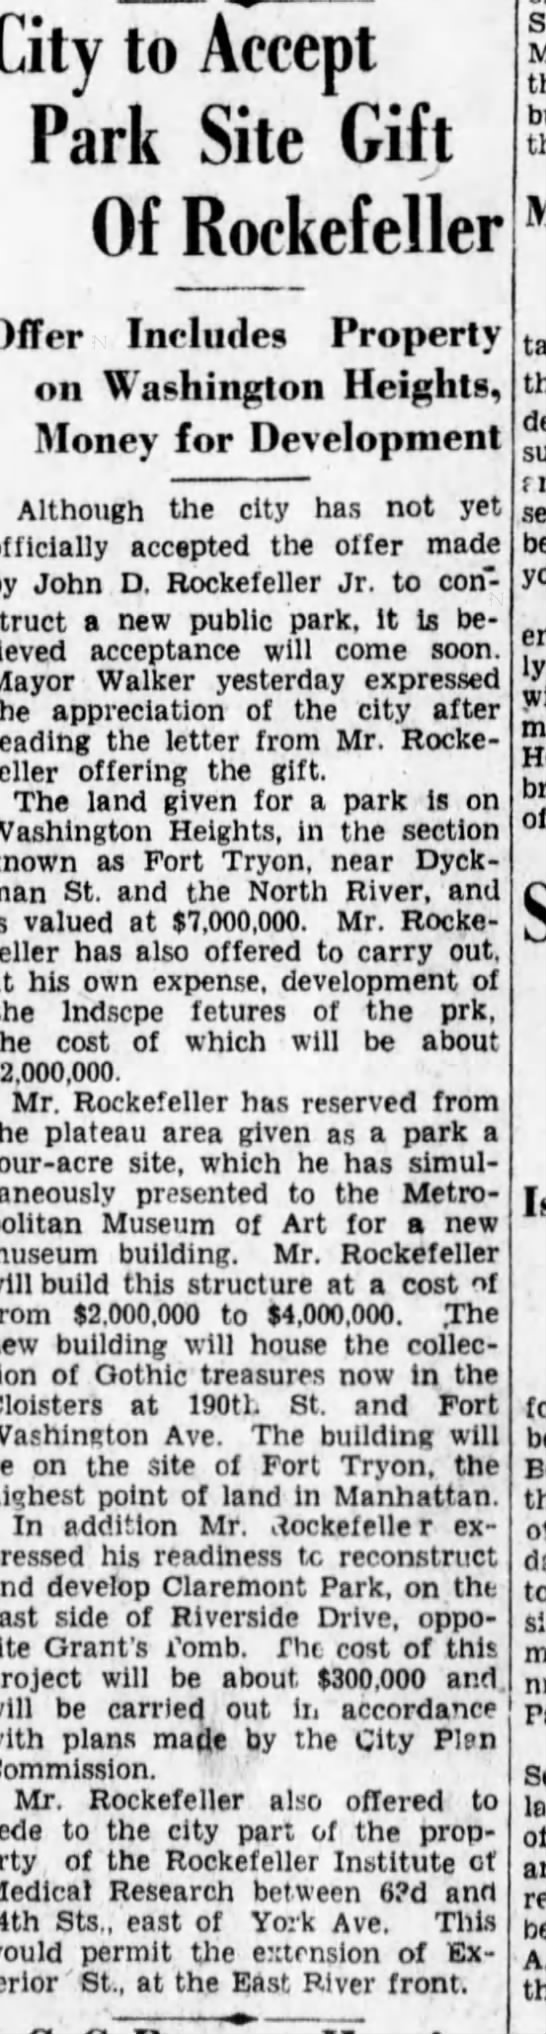 City to Accept Park Site Gift of Rockefeller - 